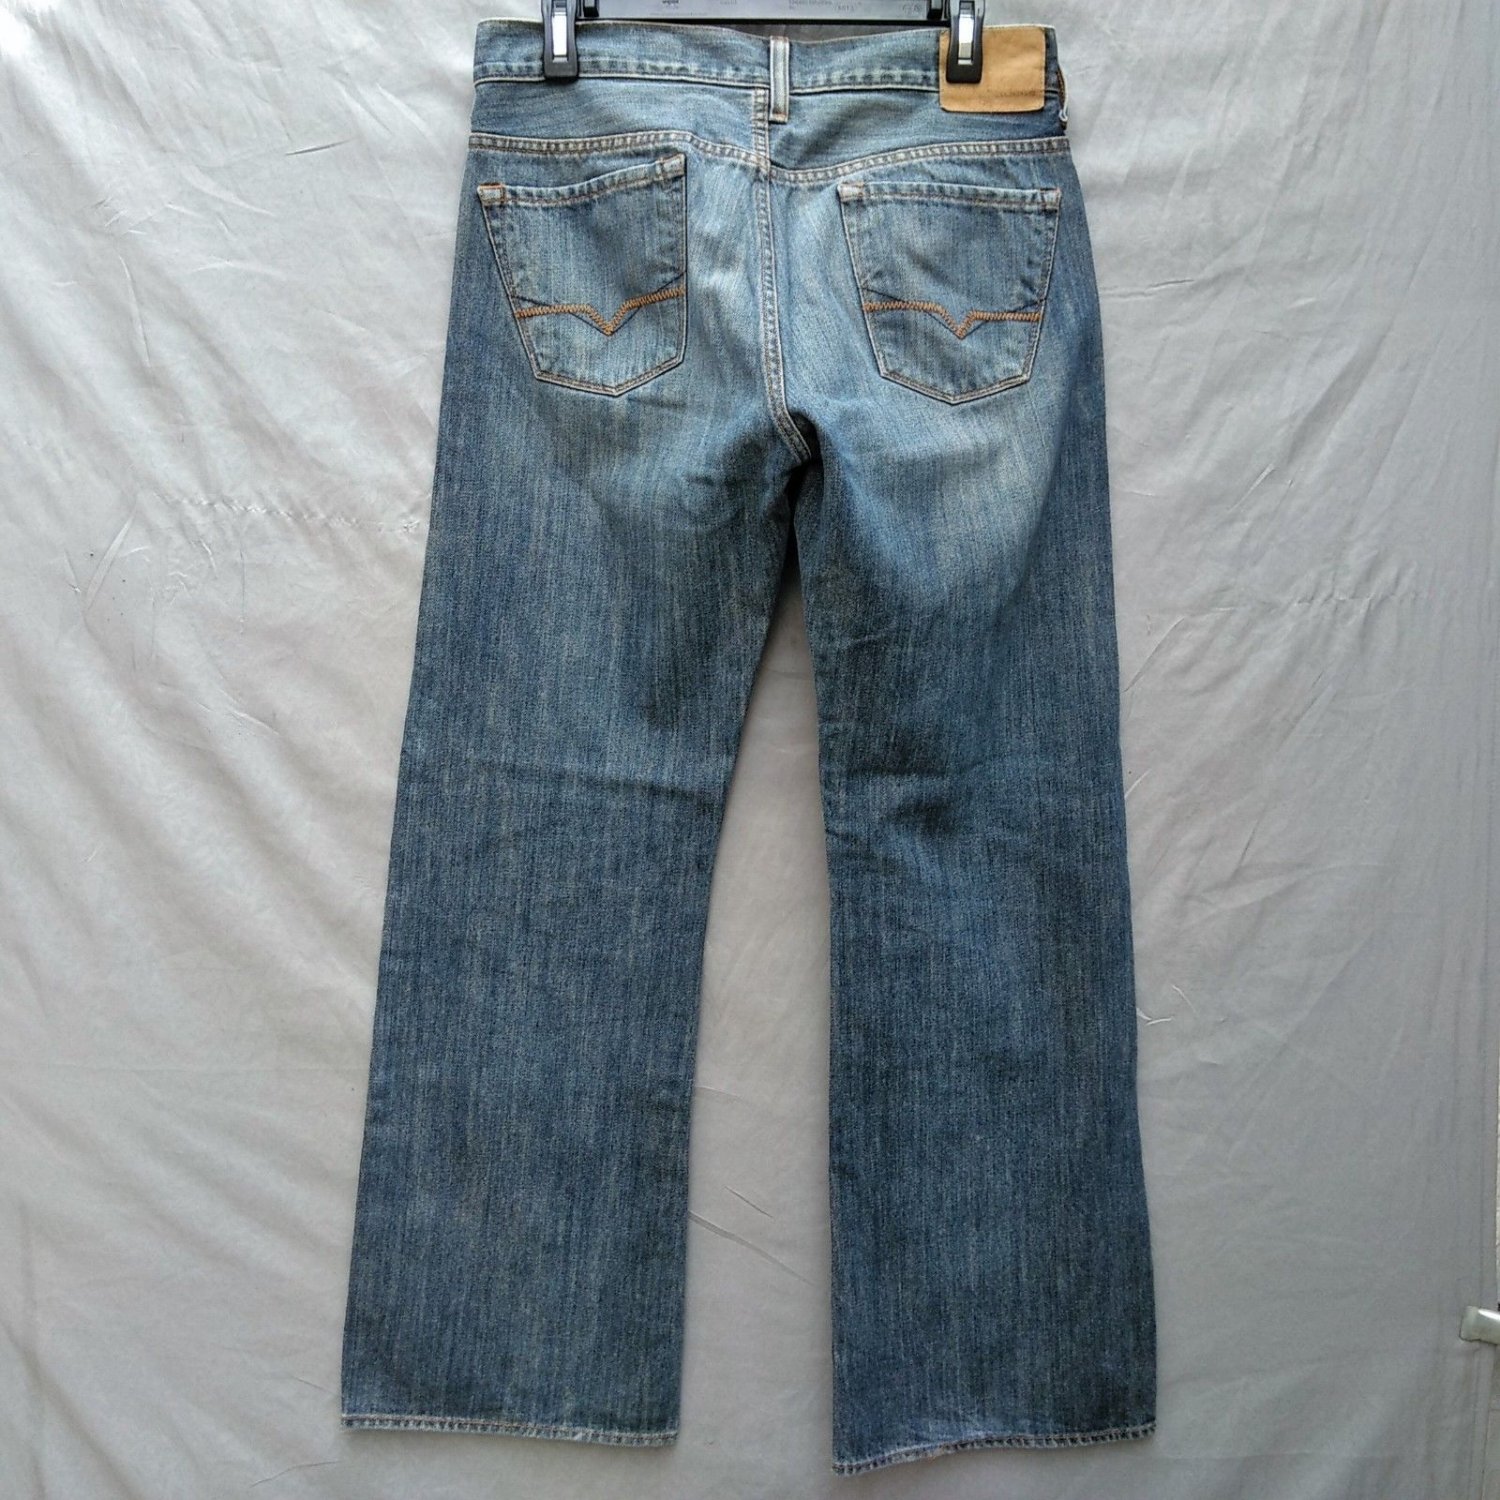 Guess BootCut Relaxed Fit Mens Jeans Size 31 x 30 Distressed Wash